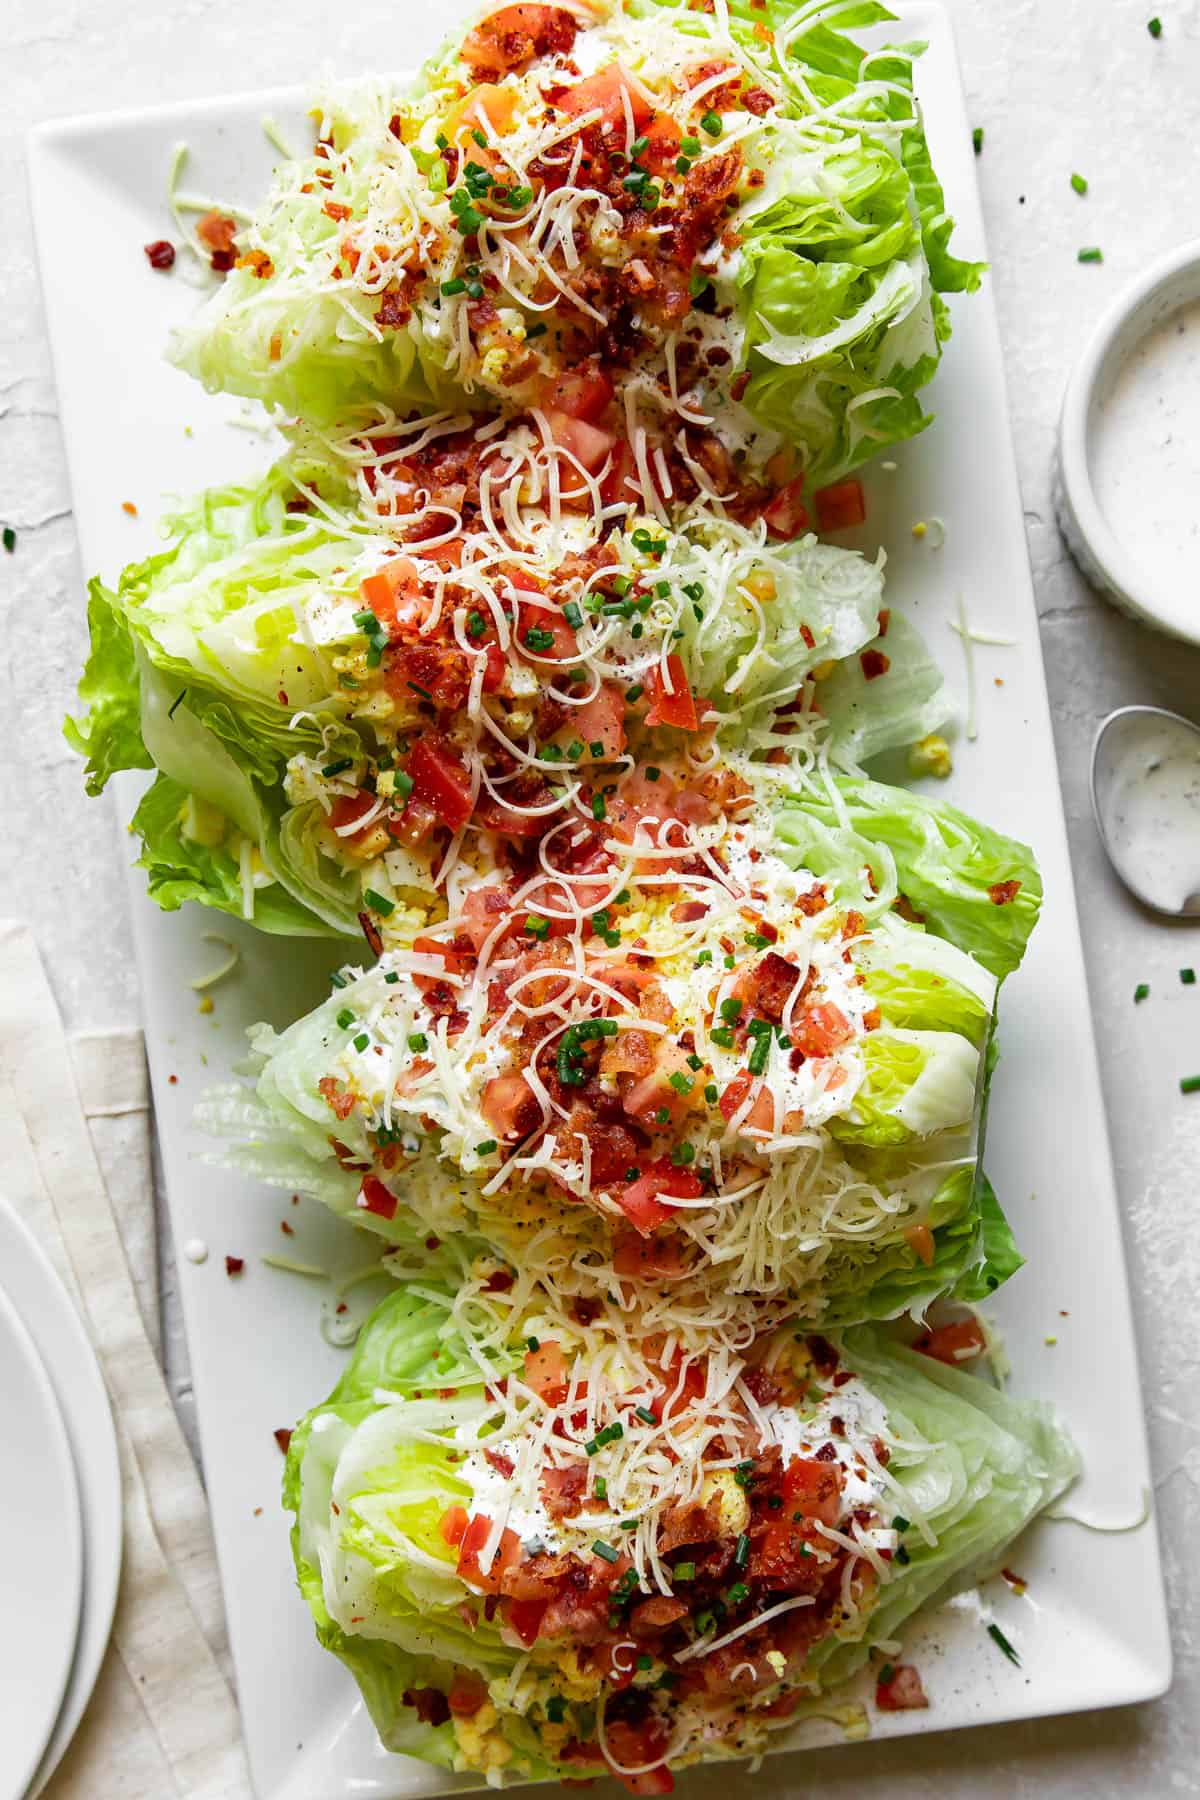 blt wedge salad on a plate.